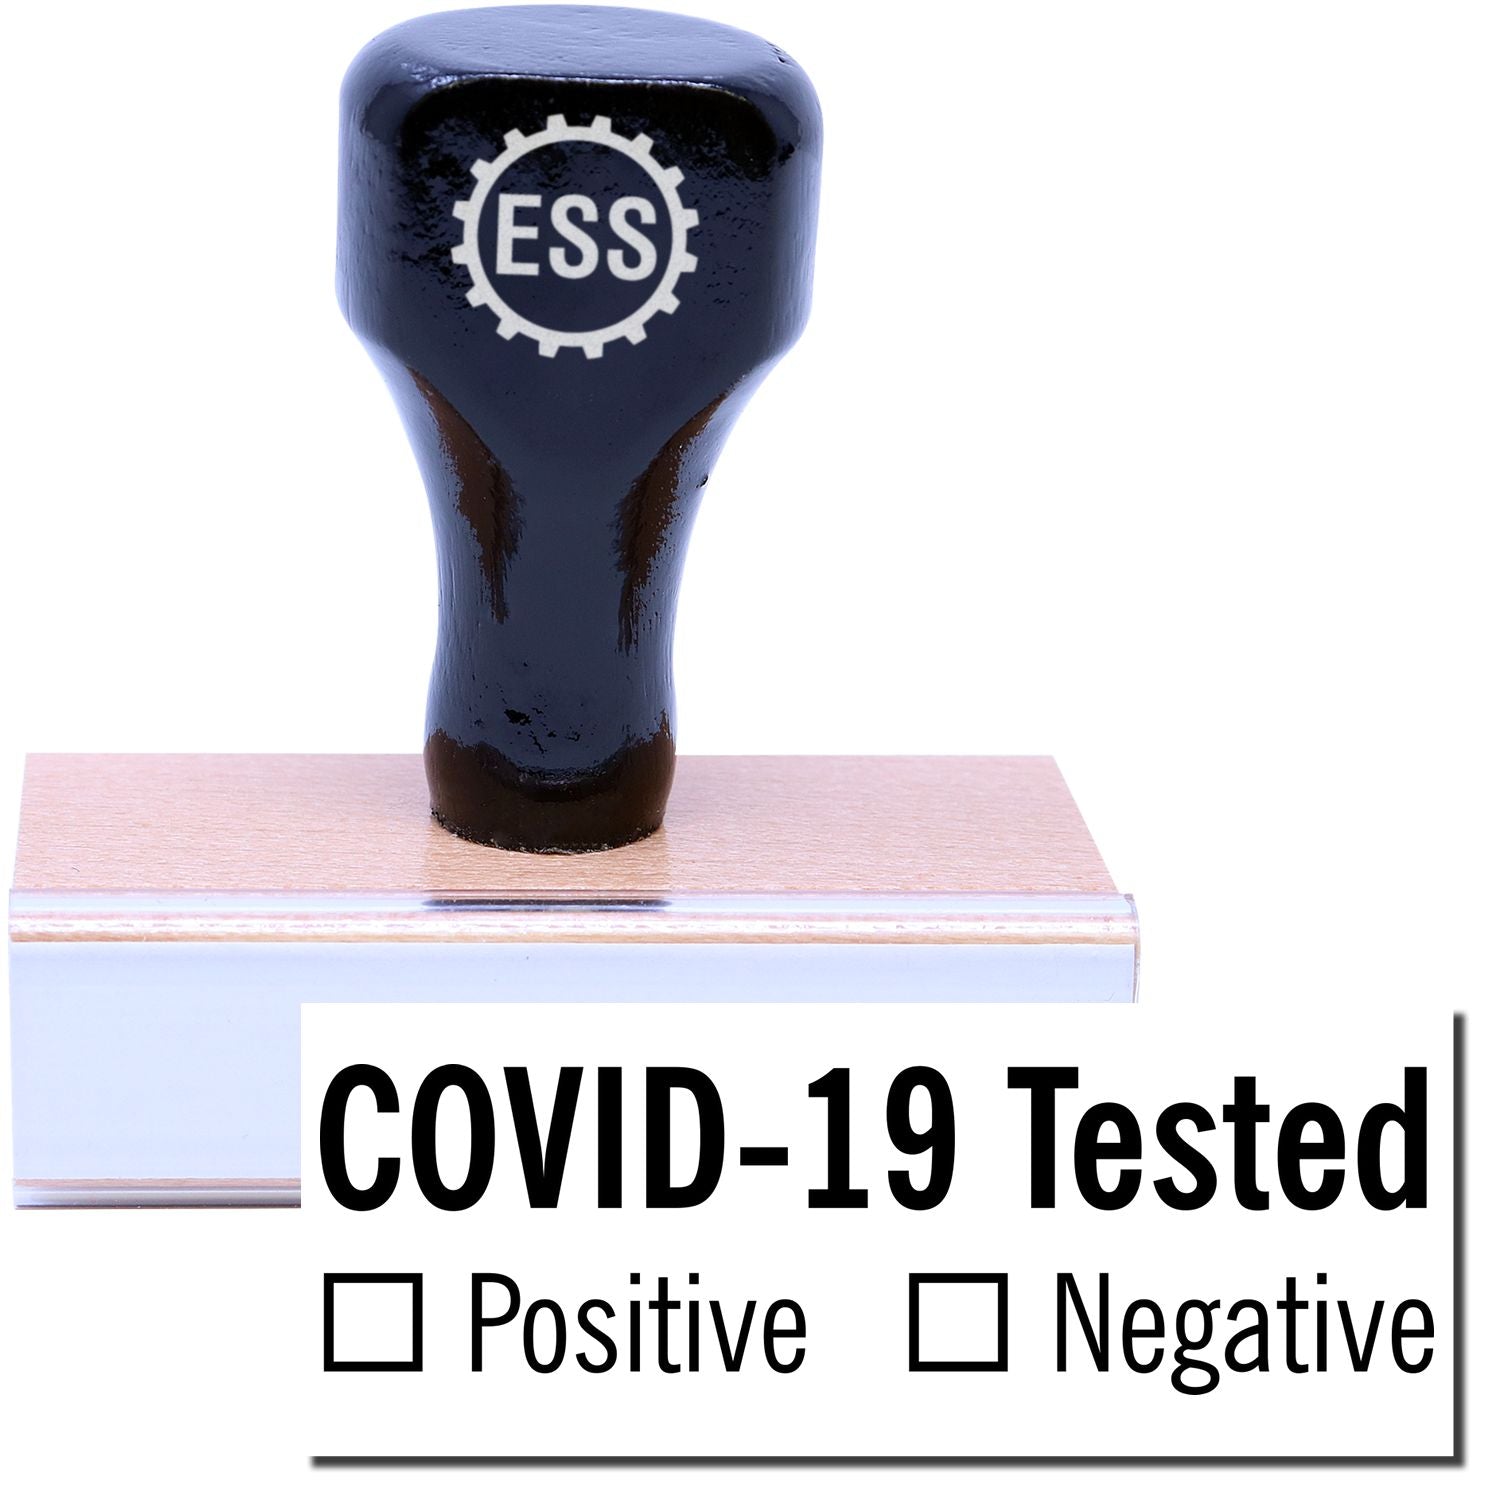 A stock office rubber stamp with a stamped image showing how the text "COVID-19 Tested" with a space underneath where a box can be checked based on whether a person is positive or negative for the virus is displayed after stamping.